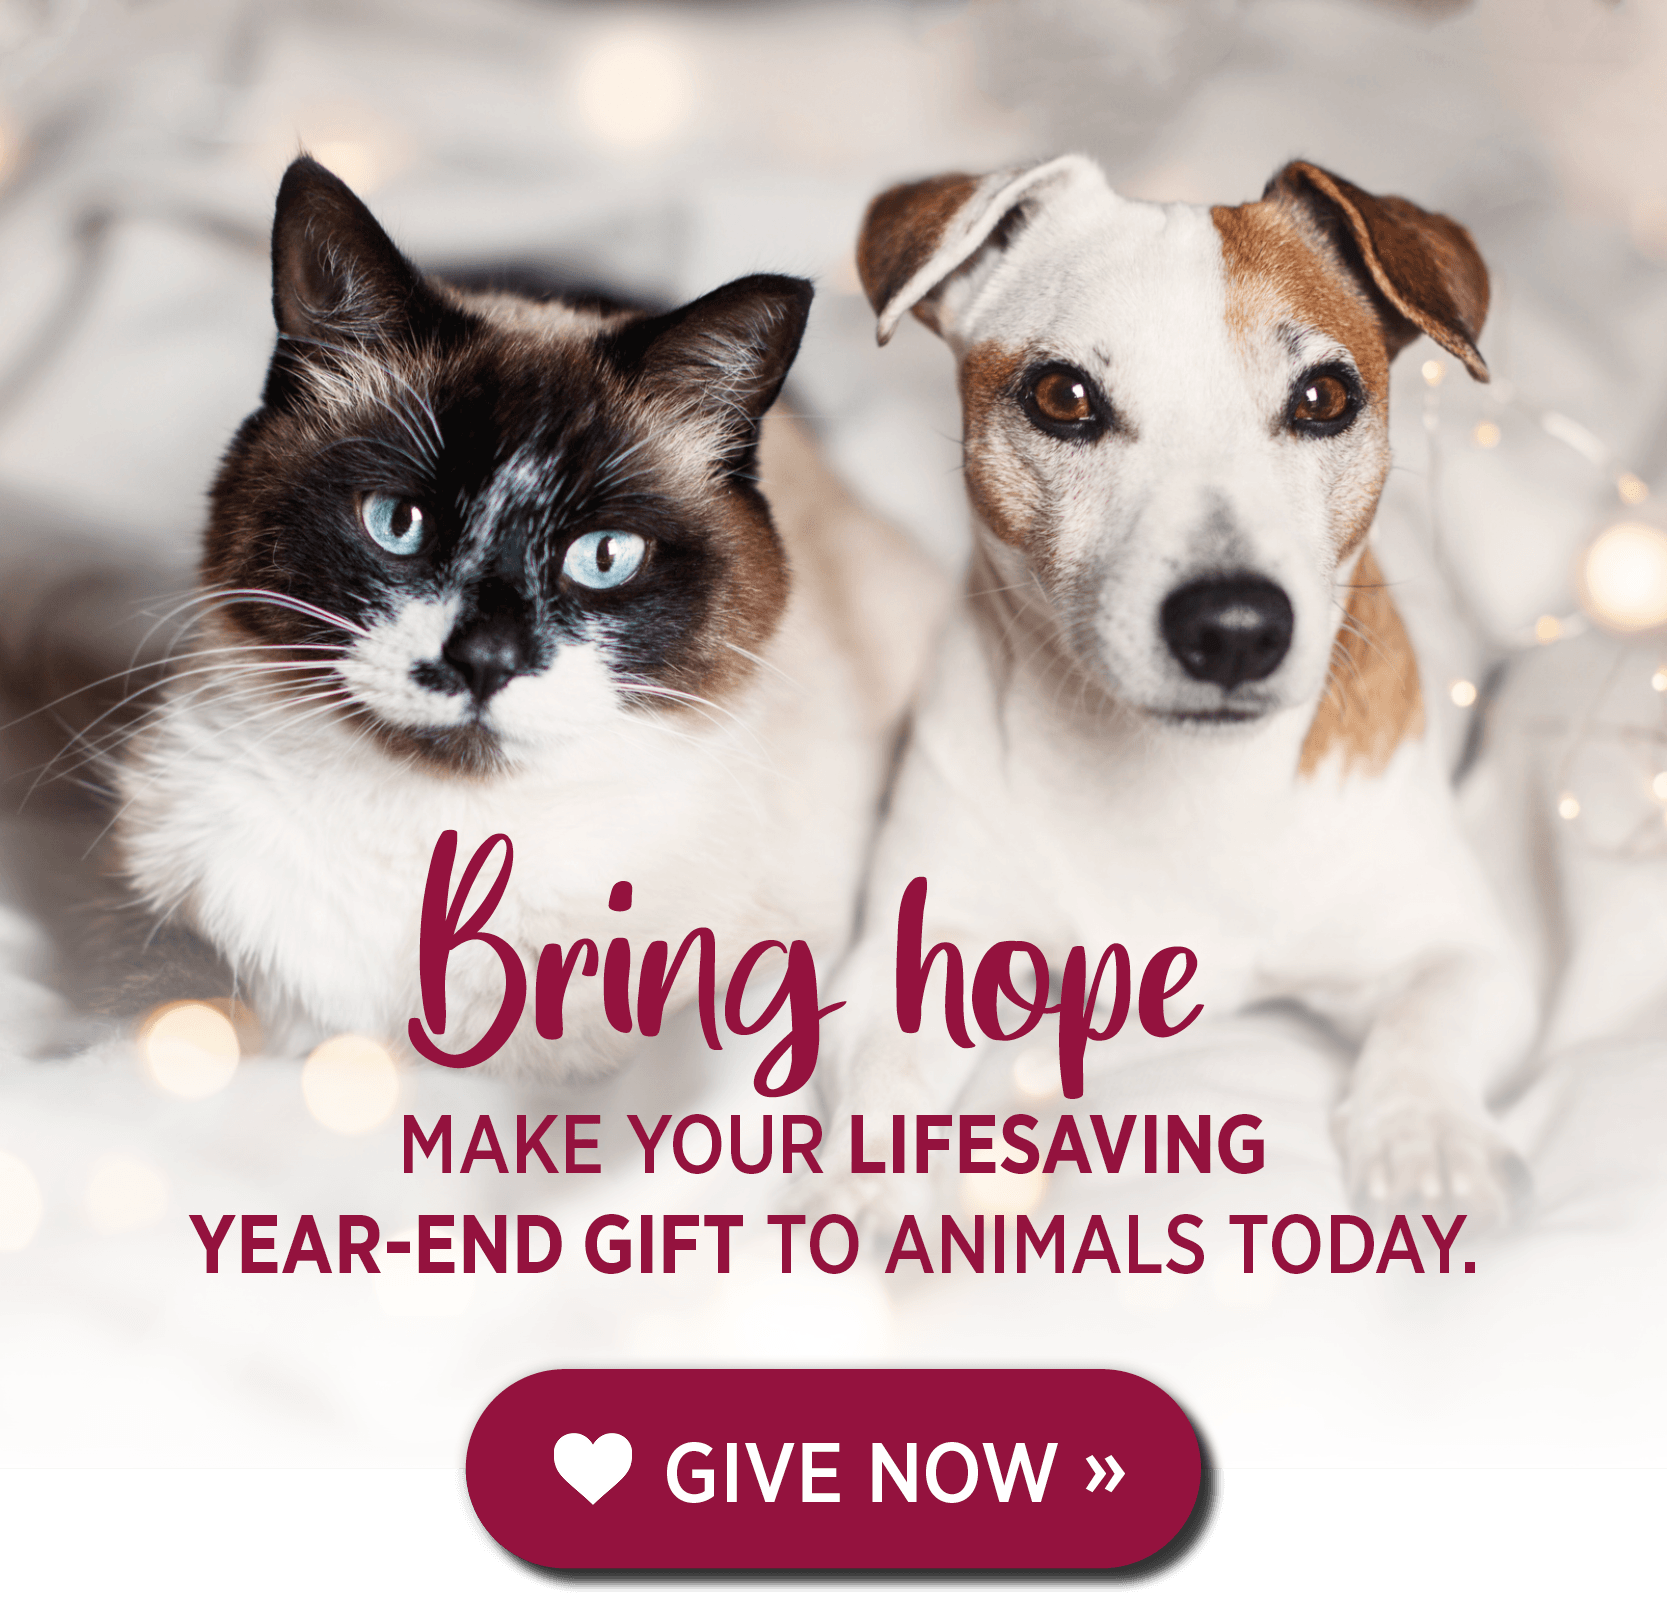 Bring hope. Make your lifesaving year-end gift to animals today. Click to give now.